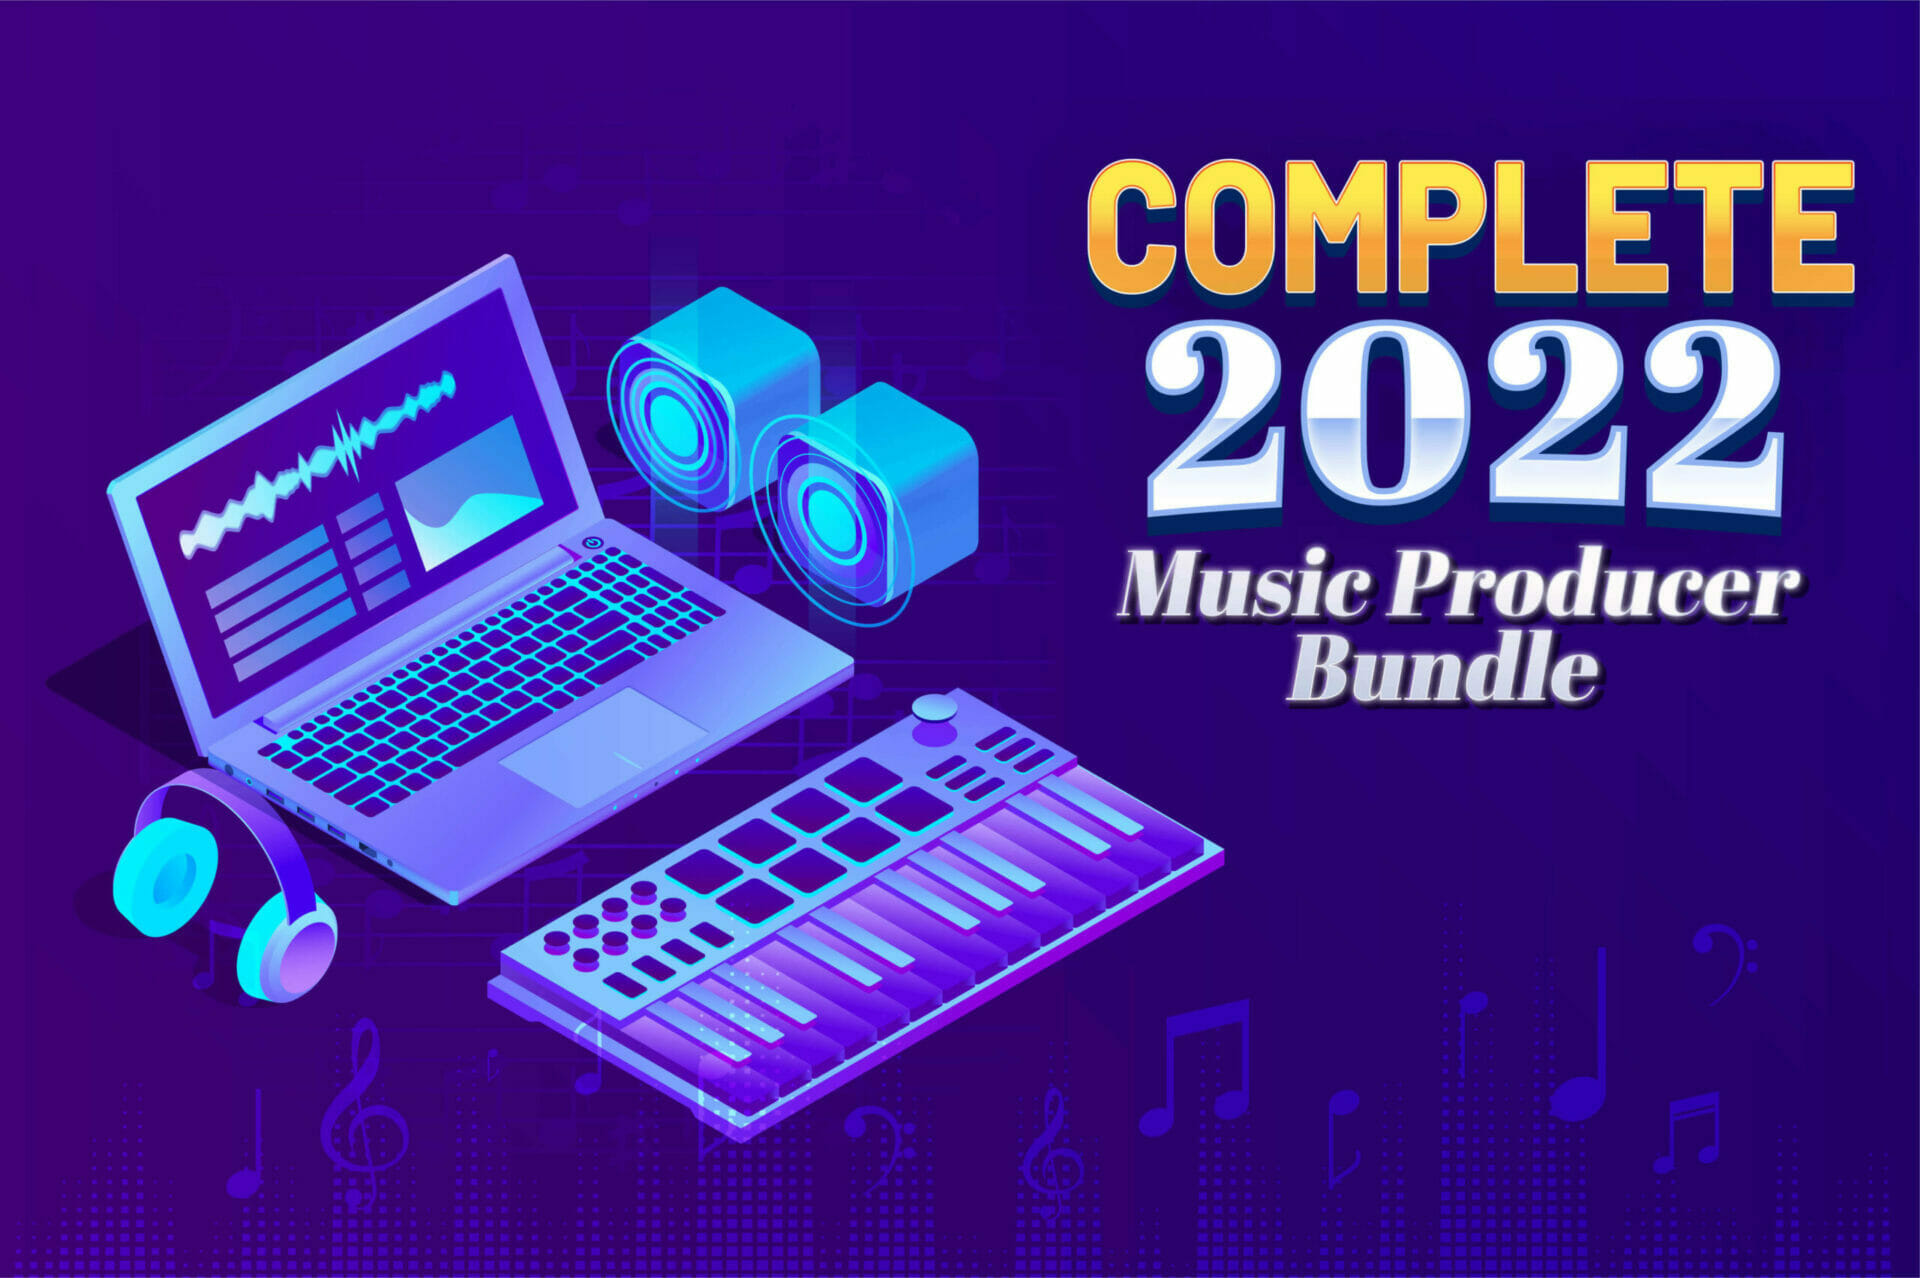 Complete 2022 Music Producer Bundle – only $39!